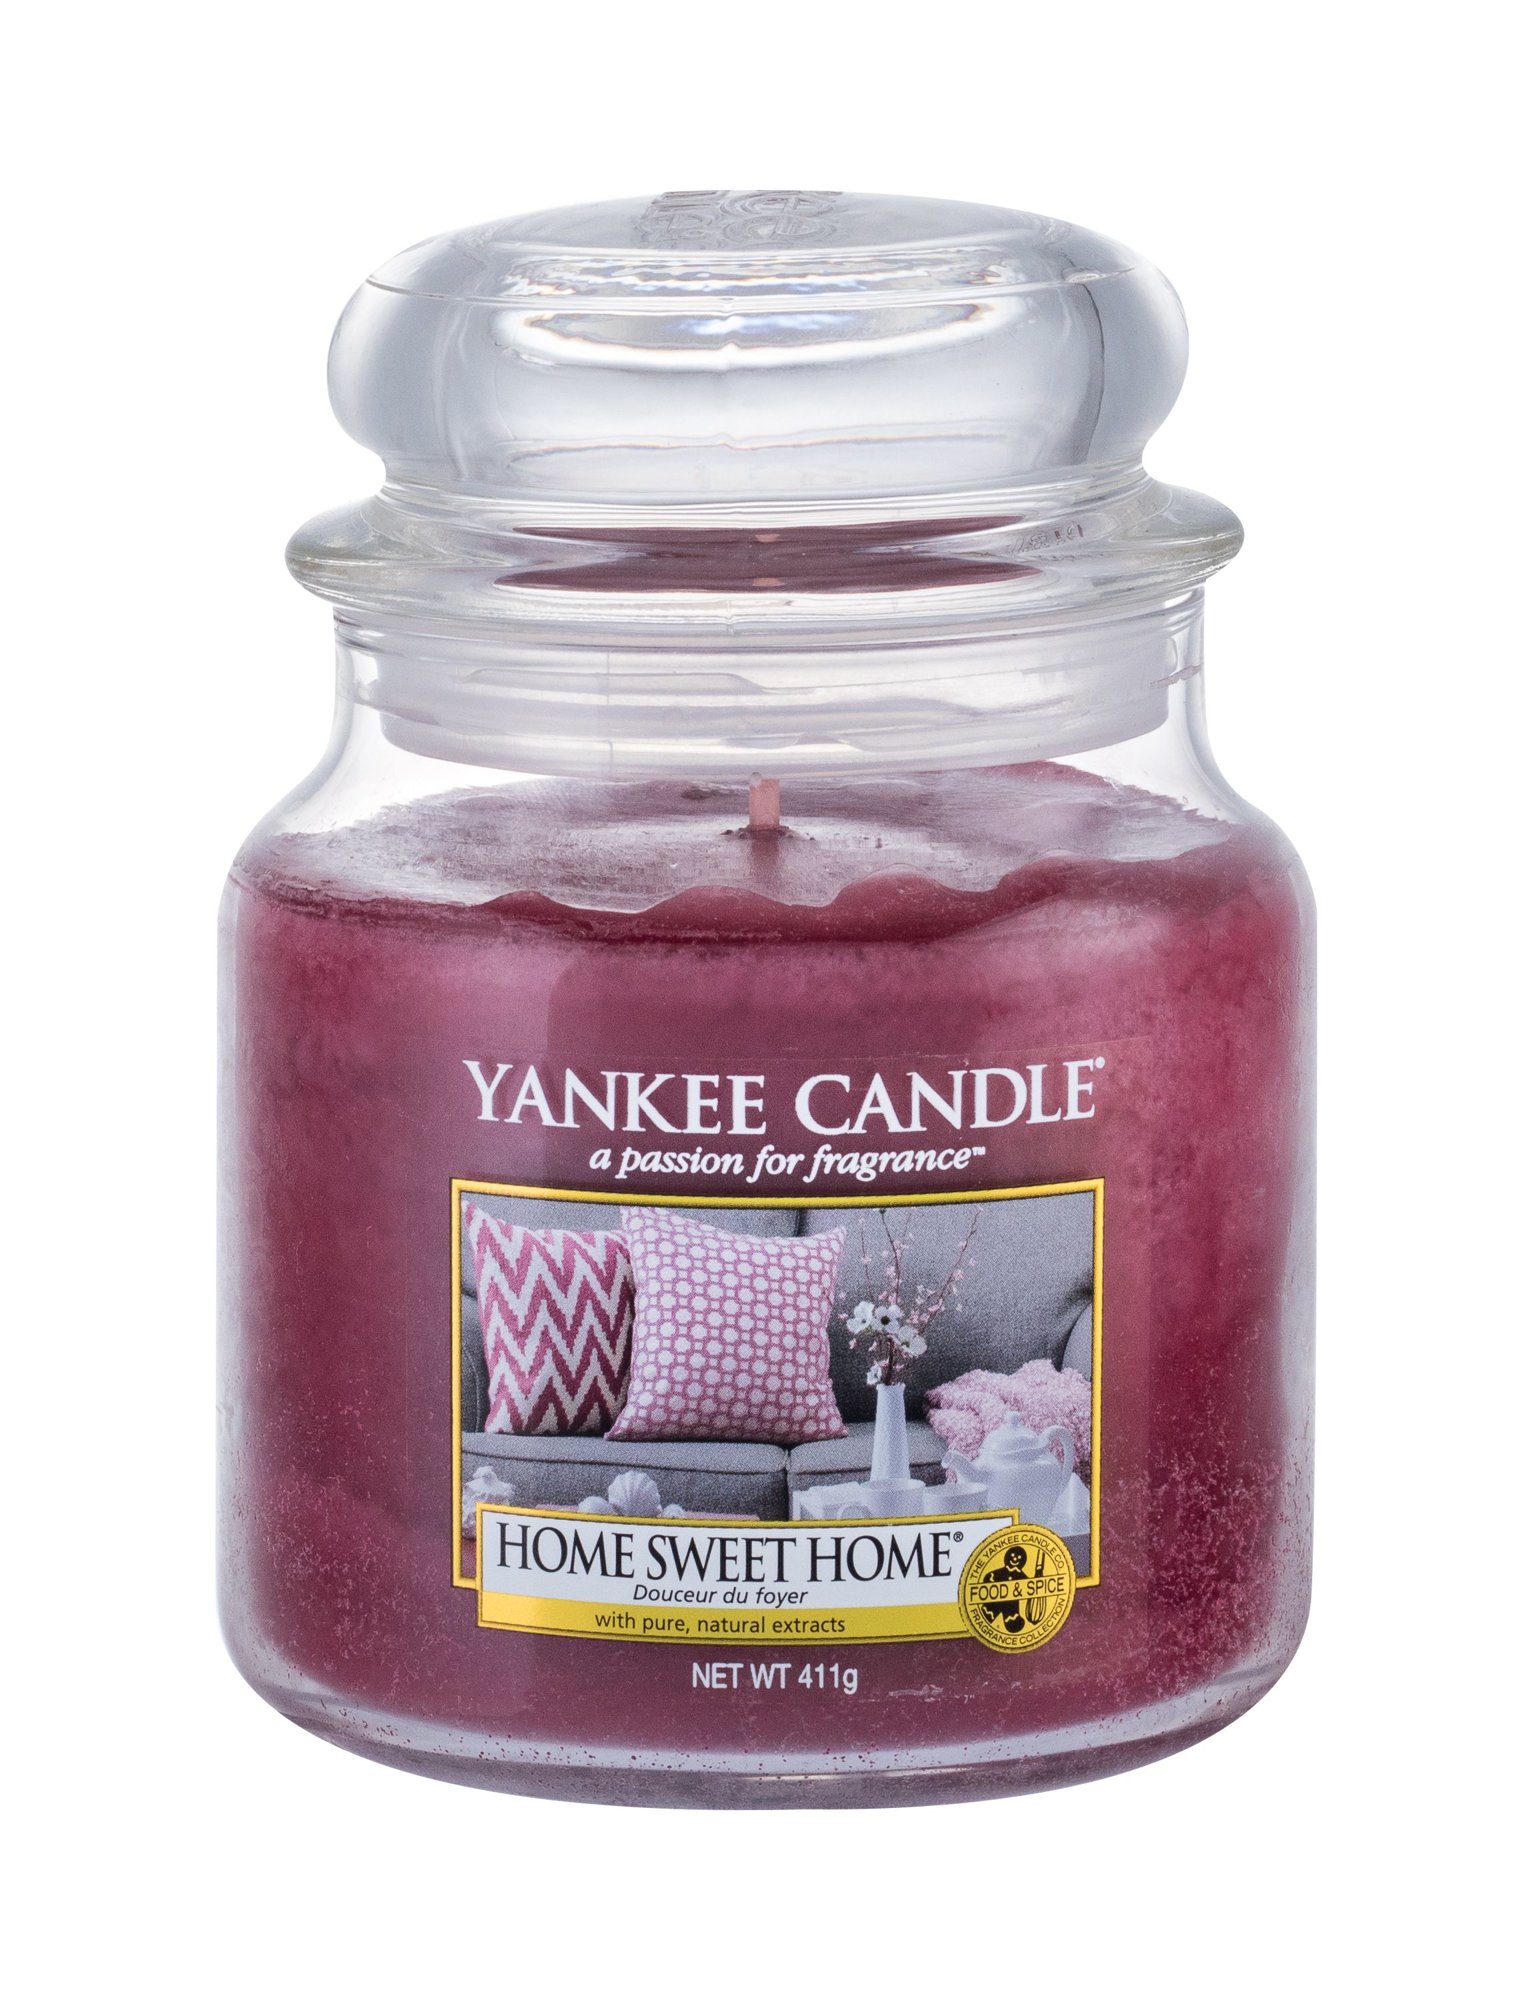 Yankee Candle Home Sweet Home 411g Kvepalai Unisex Scented Candle